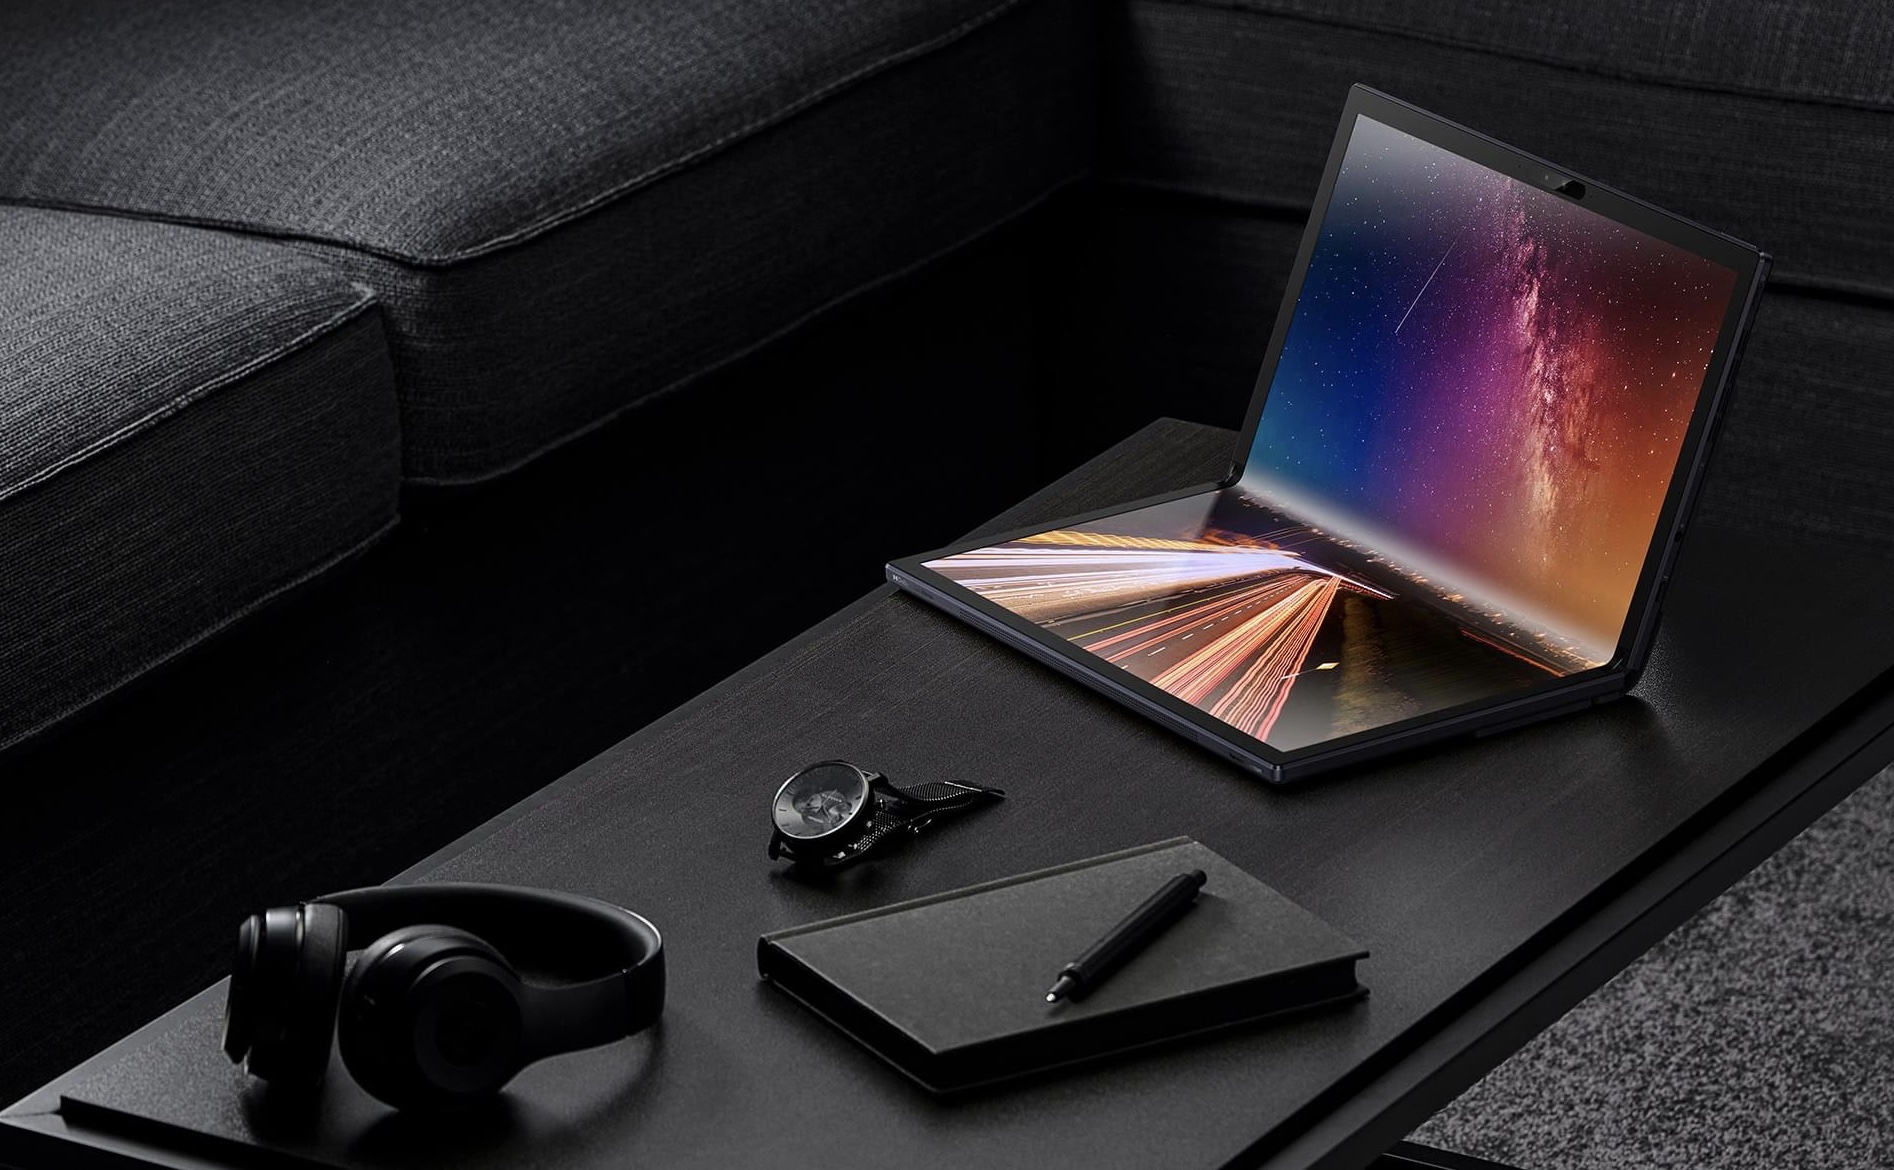 Samsung may introduce its first foldable laptop with a large, flexible OLED display in 2023